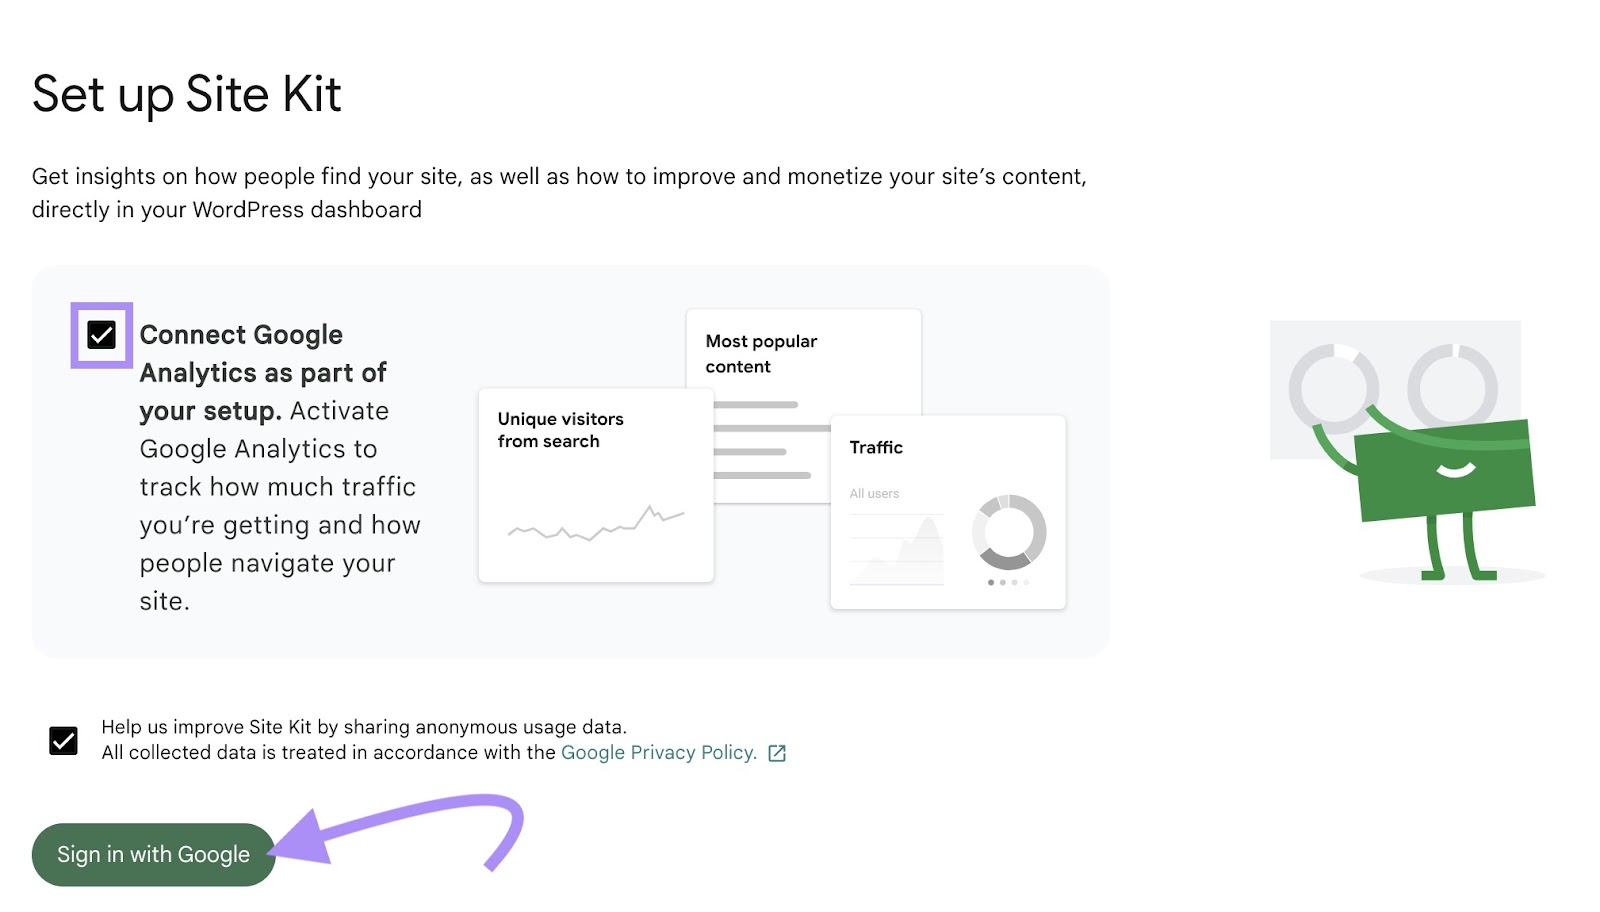 “Connect Google Analytics as part of your setup” checkbox